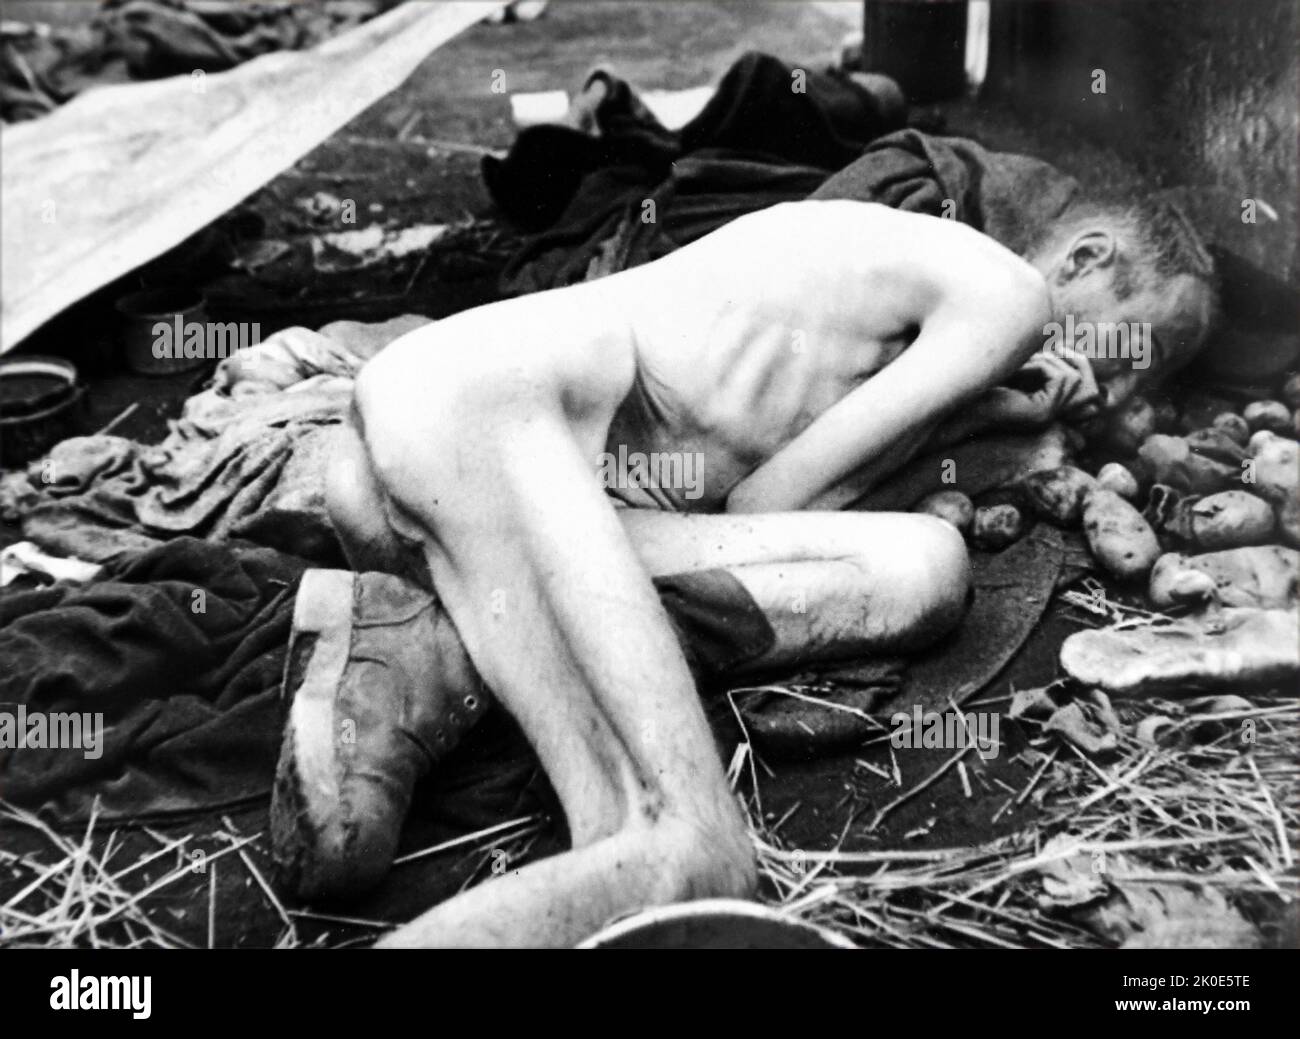 Body of a prisoner at the Dachau Nazi concentration camp, opened on 22 March 1933, which was initially intended to hold political prisoners. Dachau is in Bavaria. After its opening by Heinrich Himmler, it held Jews, Romani, German and Austrian criminals. It was liberated by U.S. forces on 29 April 1945. Stock Photo